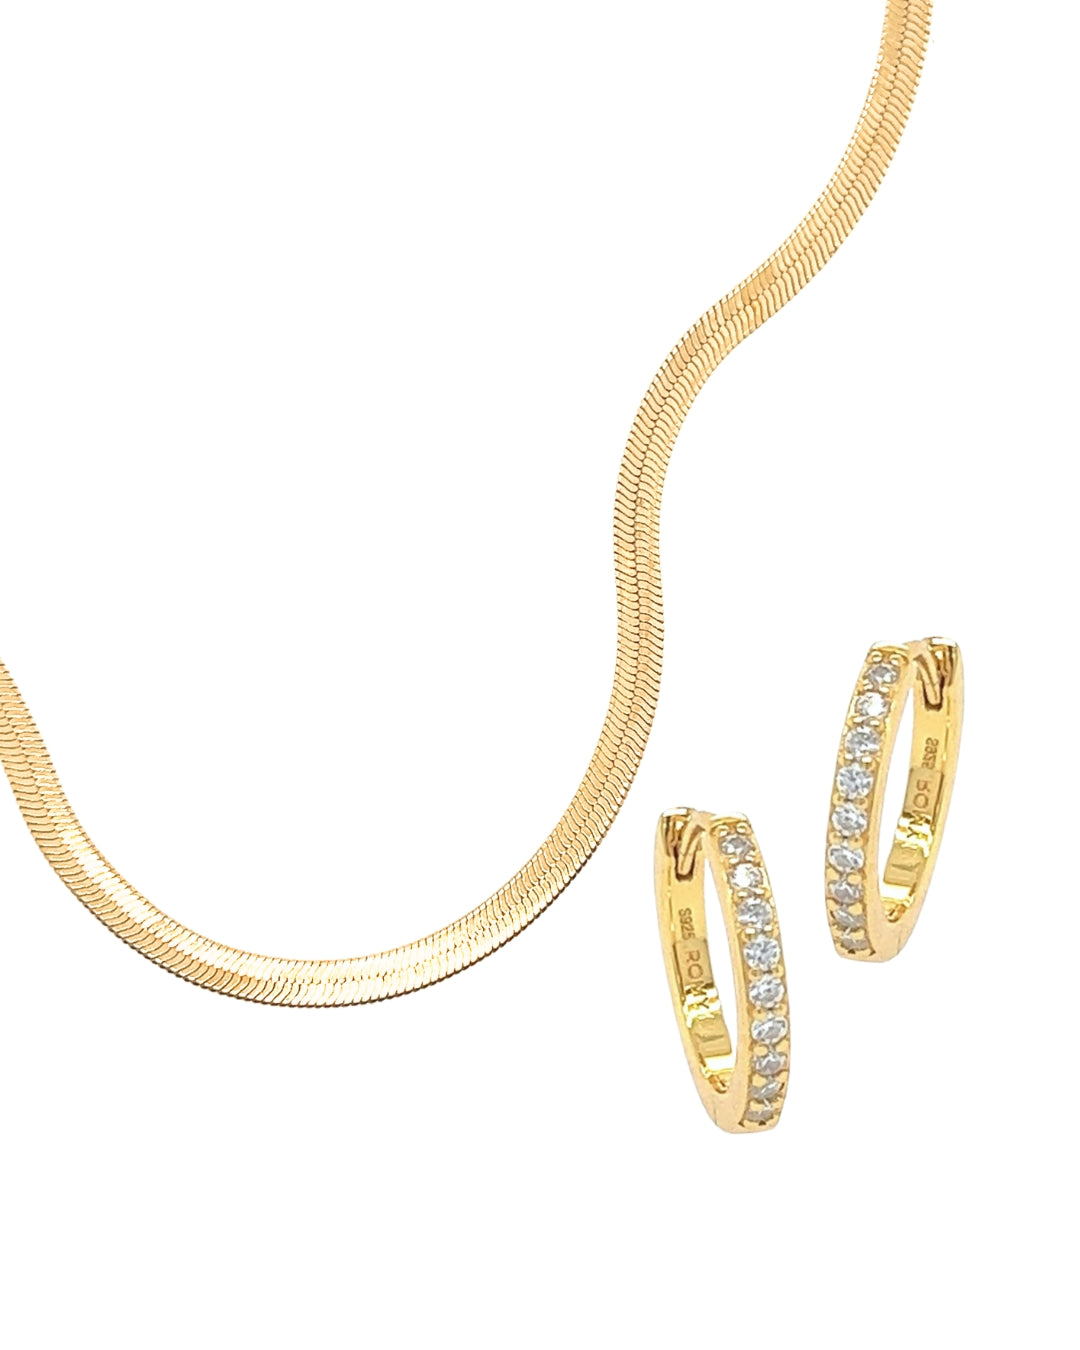 Ultimate Gold Necklace and Earrings Set